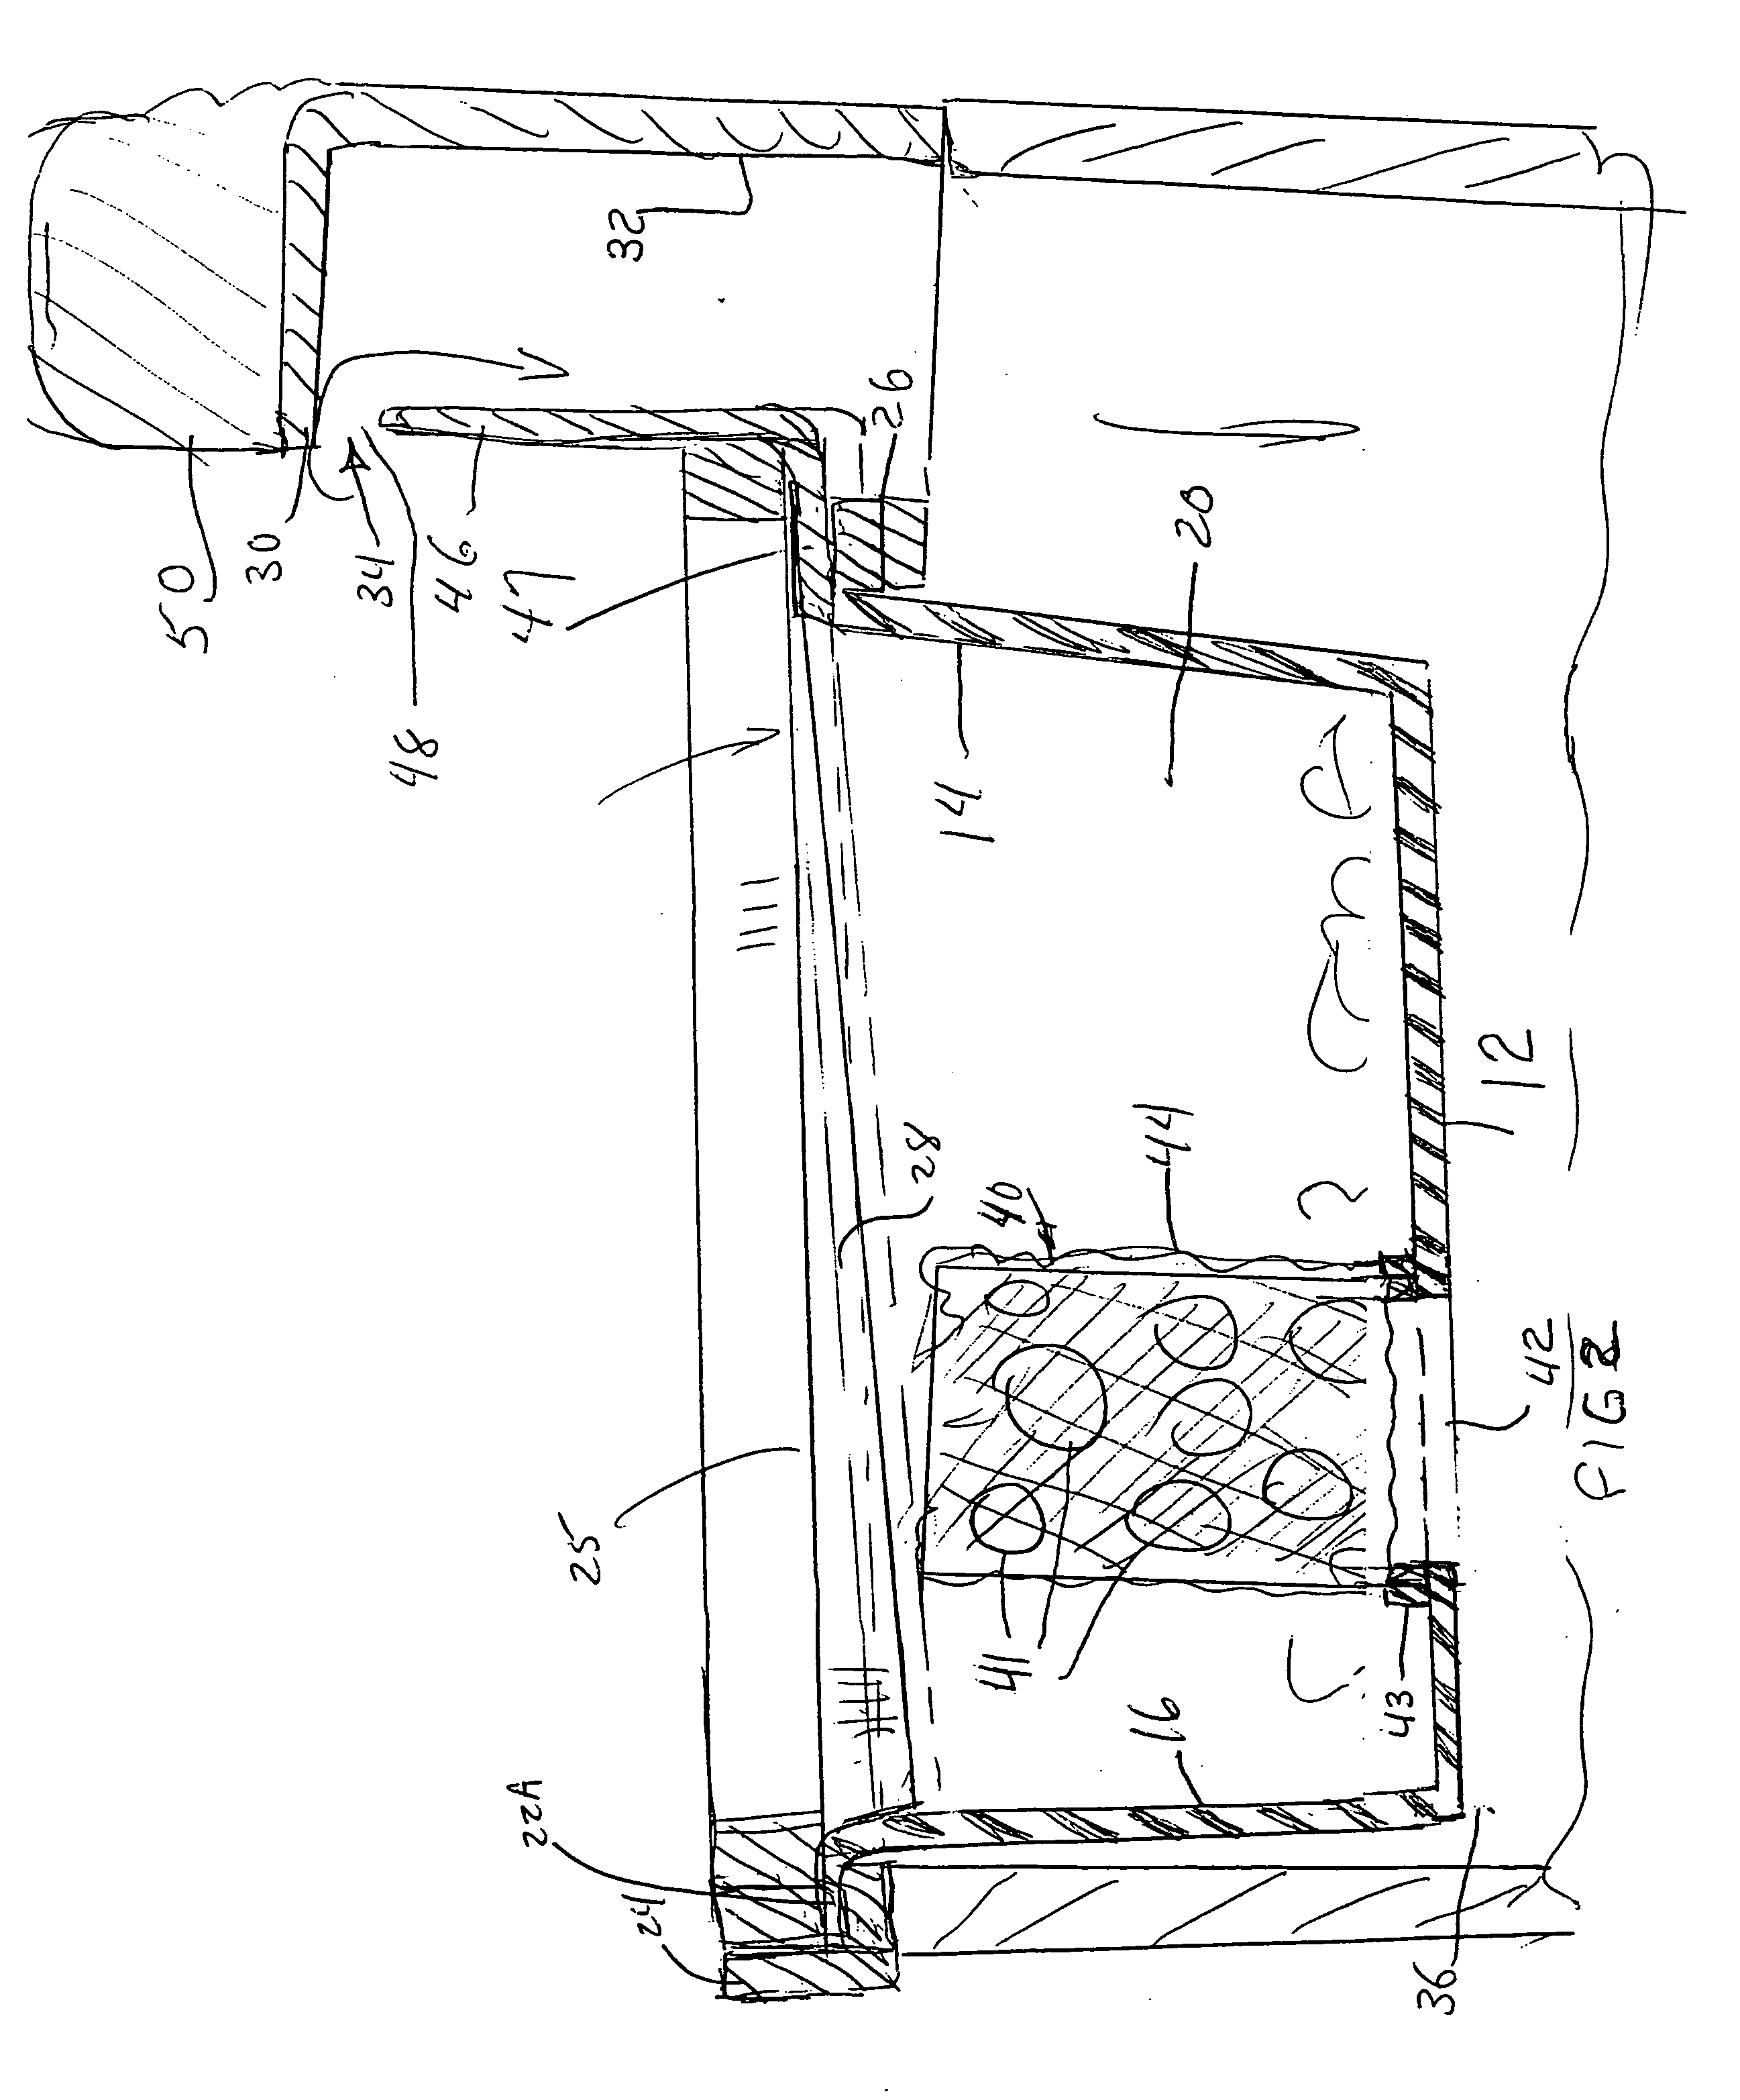 Sediment control drain and method of construction